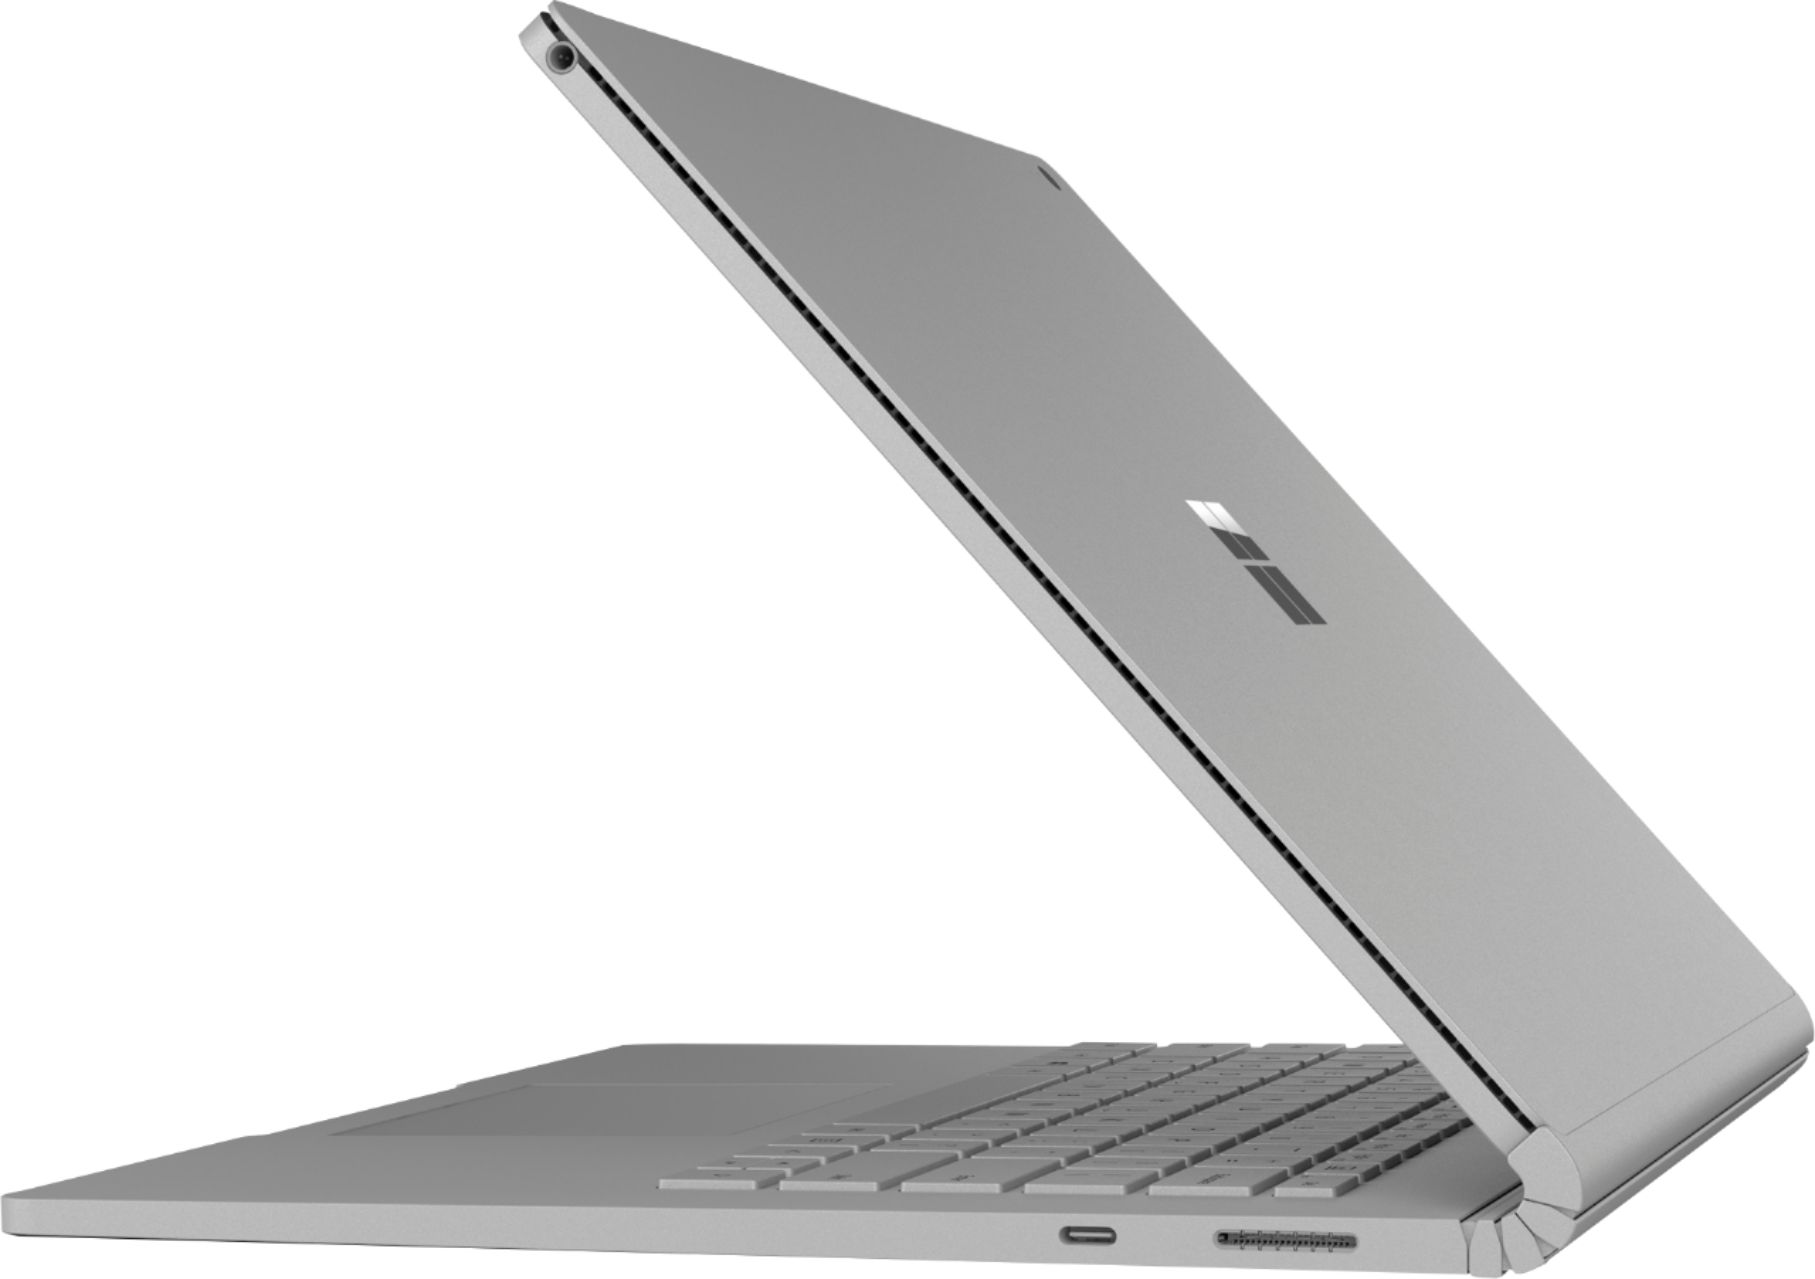 Left View: Microsoft - Geek Squad Certified Refurbished Surface Laptop 3 - 13.5" Touch-Screen - Intel Core i7 - 16GB Memory - 256GB SSD